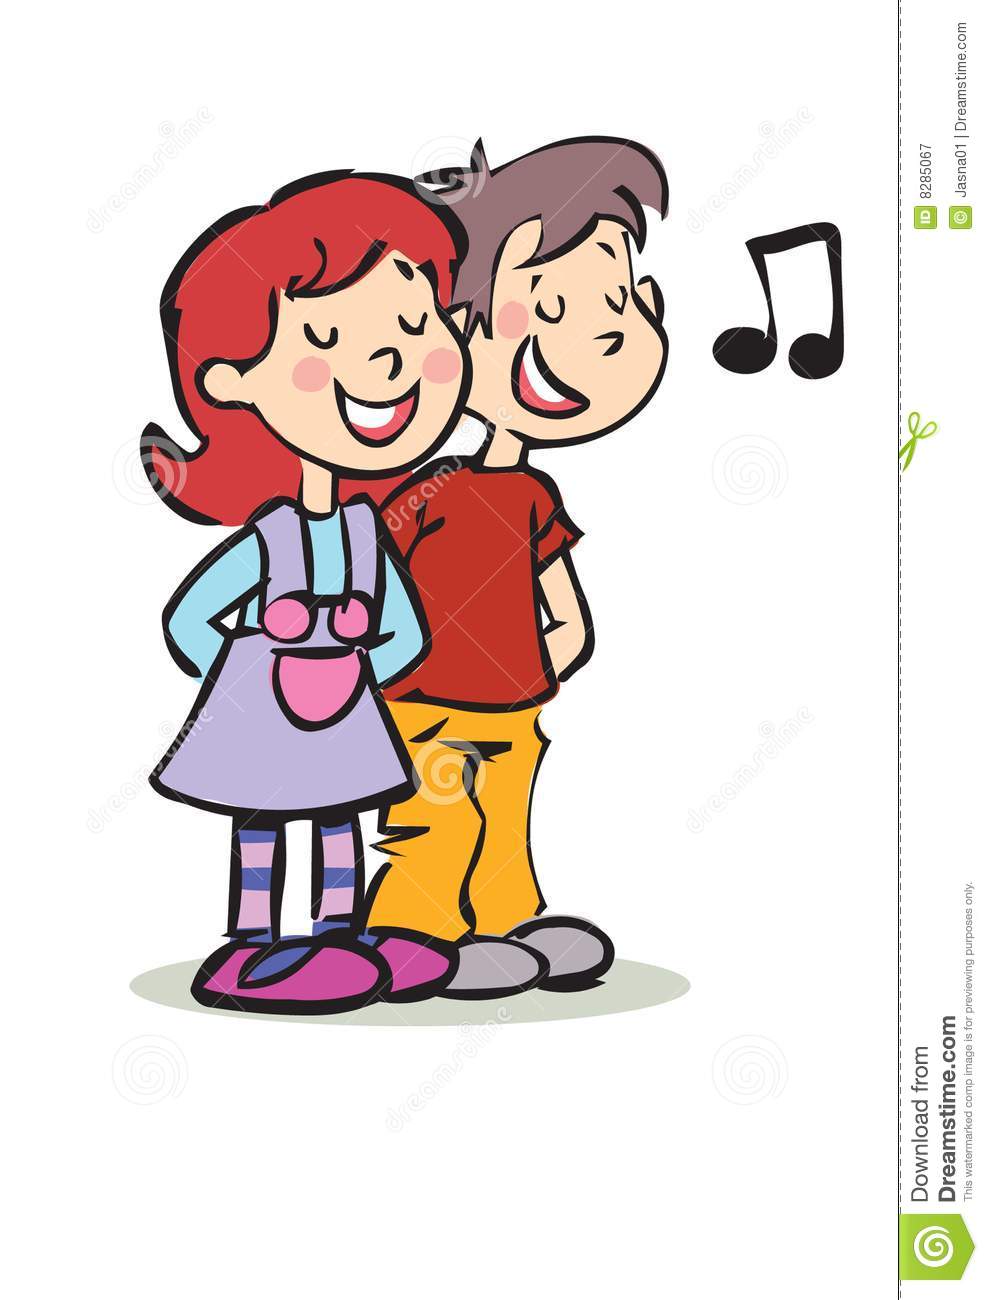 Happy Boy And Girl Singing Royalty Free Stock Photography   Image